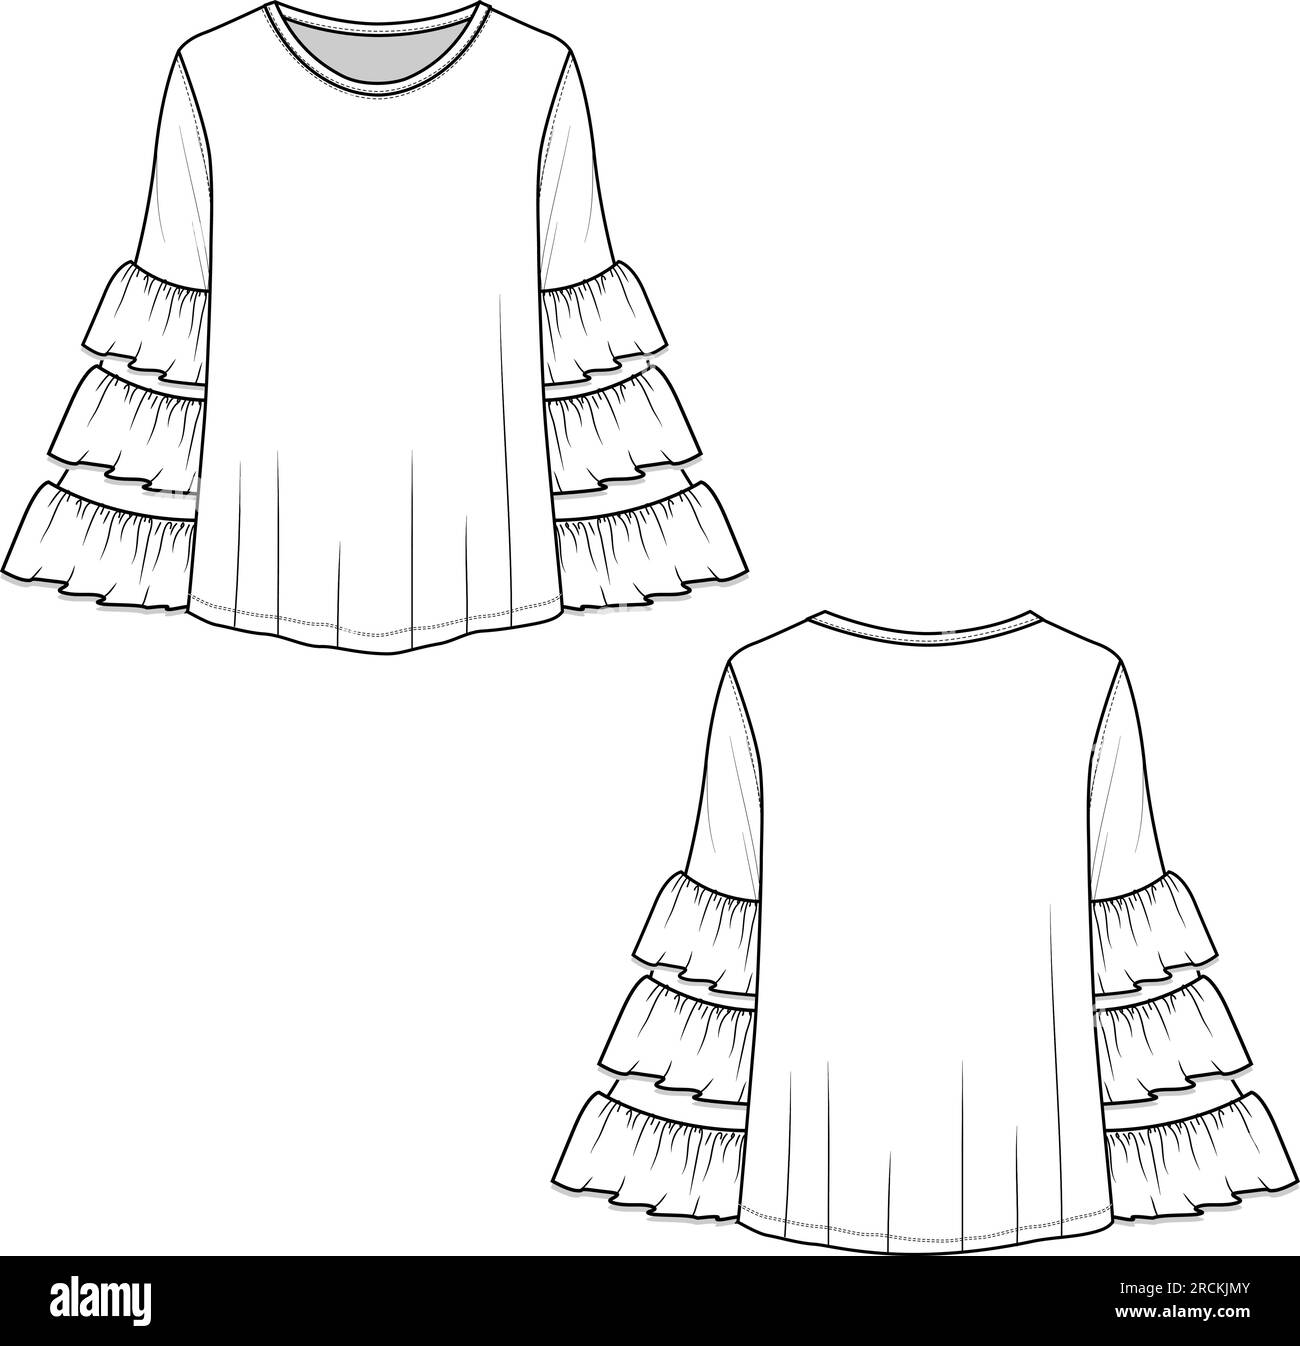 Girls dress with ruffles sleeve flat sketch Vector Image